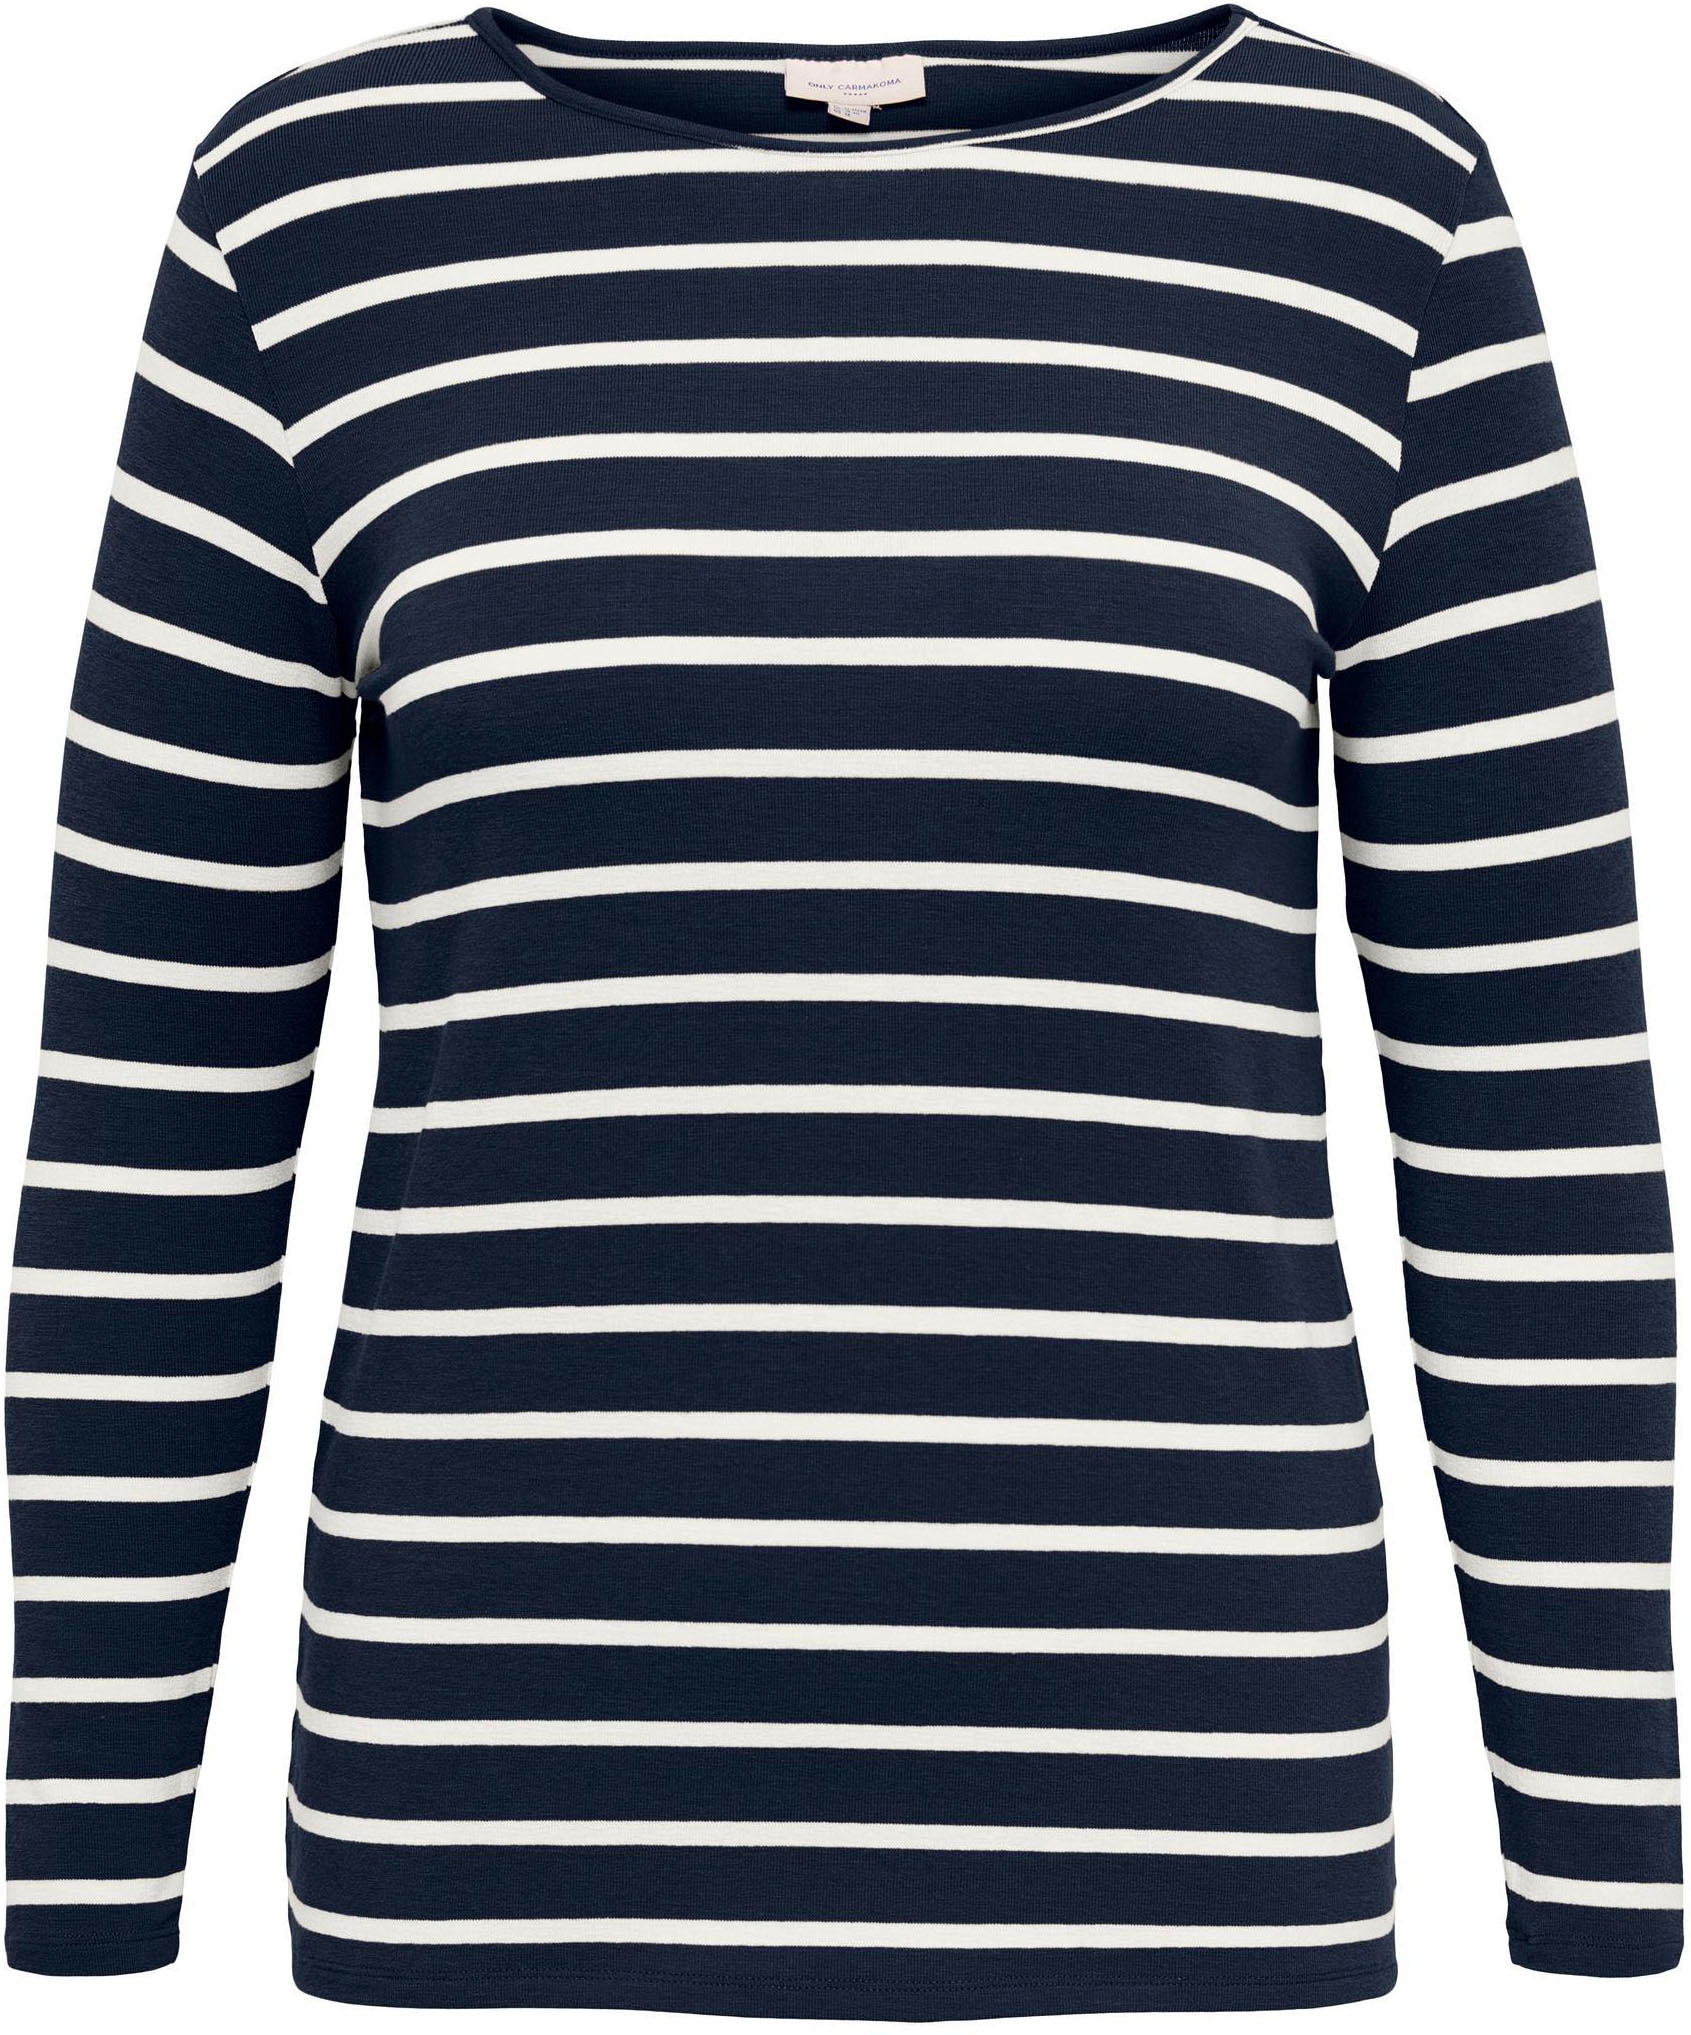 ONLY CARMAKOMA Langarmshirt »CARELKE L/S bei OTTO TOP JRS« online